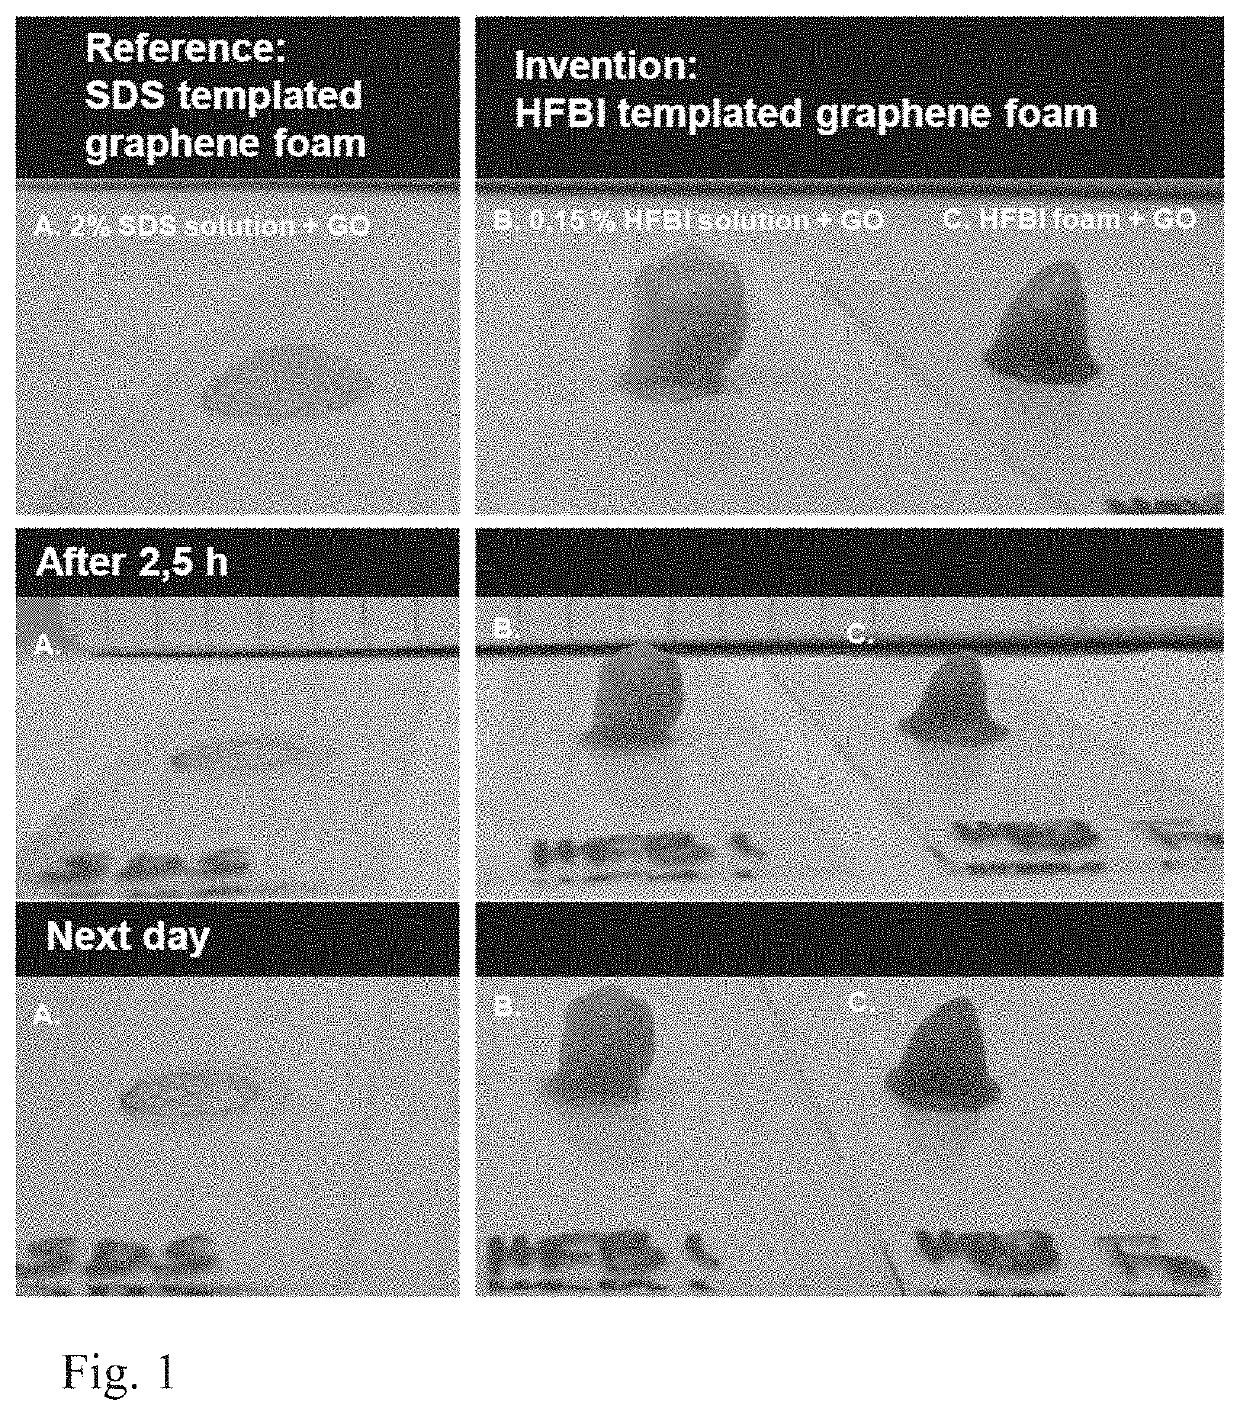 Production of graphene structures